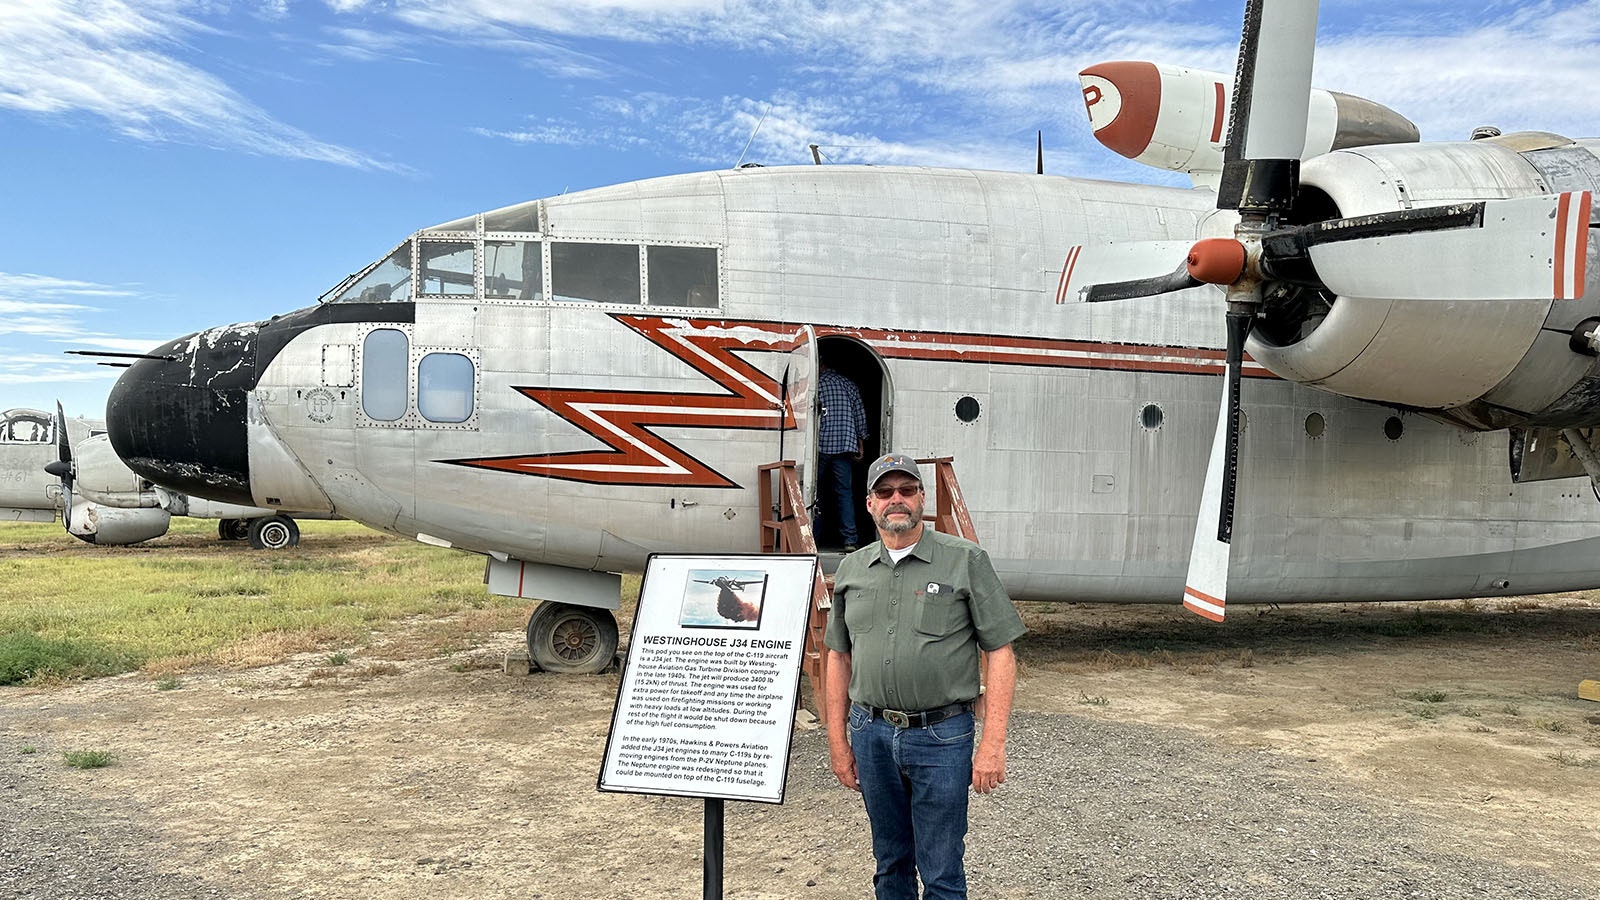 Bob Hawkins poses in front of a Fairchild C-119 at the Museum of Flight and Aerial Firefighting in Greybull. Hawkin logged hundreds of hours flying planes like this while battling forest fires. He installed the jet engine on top of the plane to increase its efficiency.